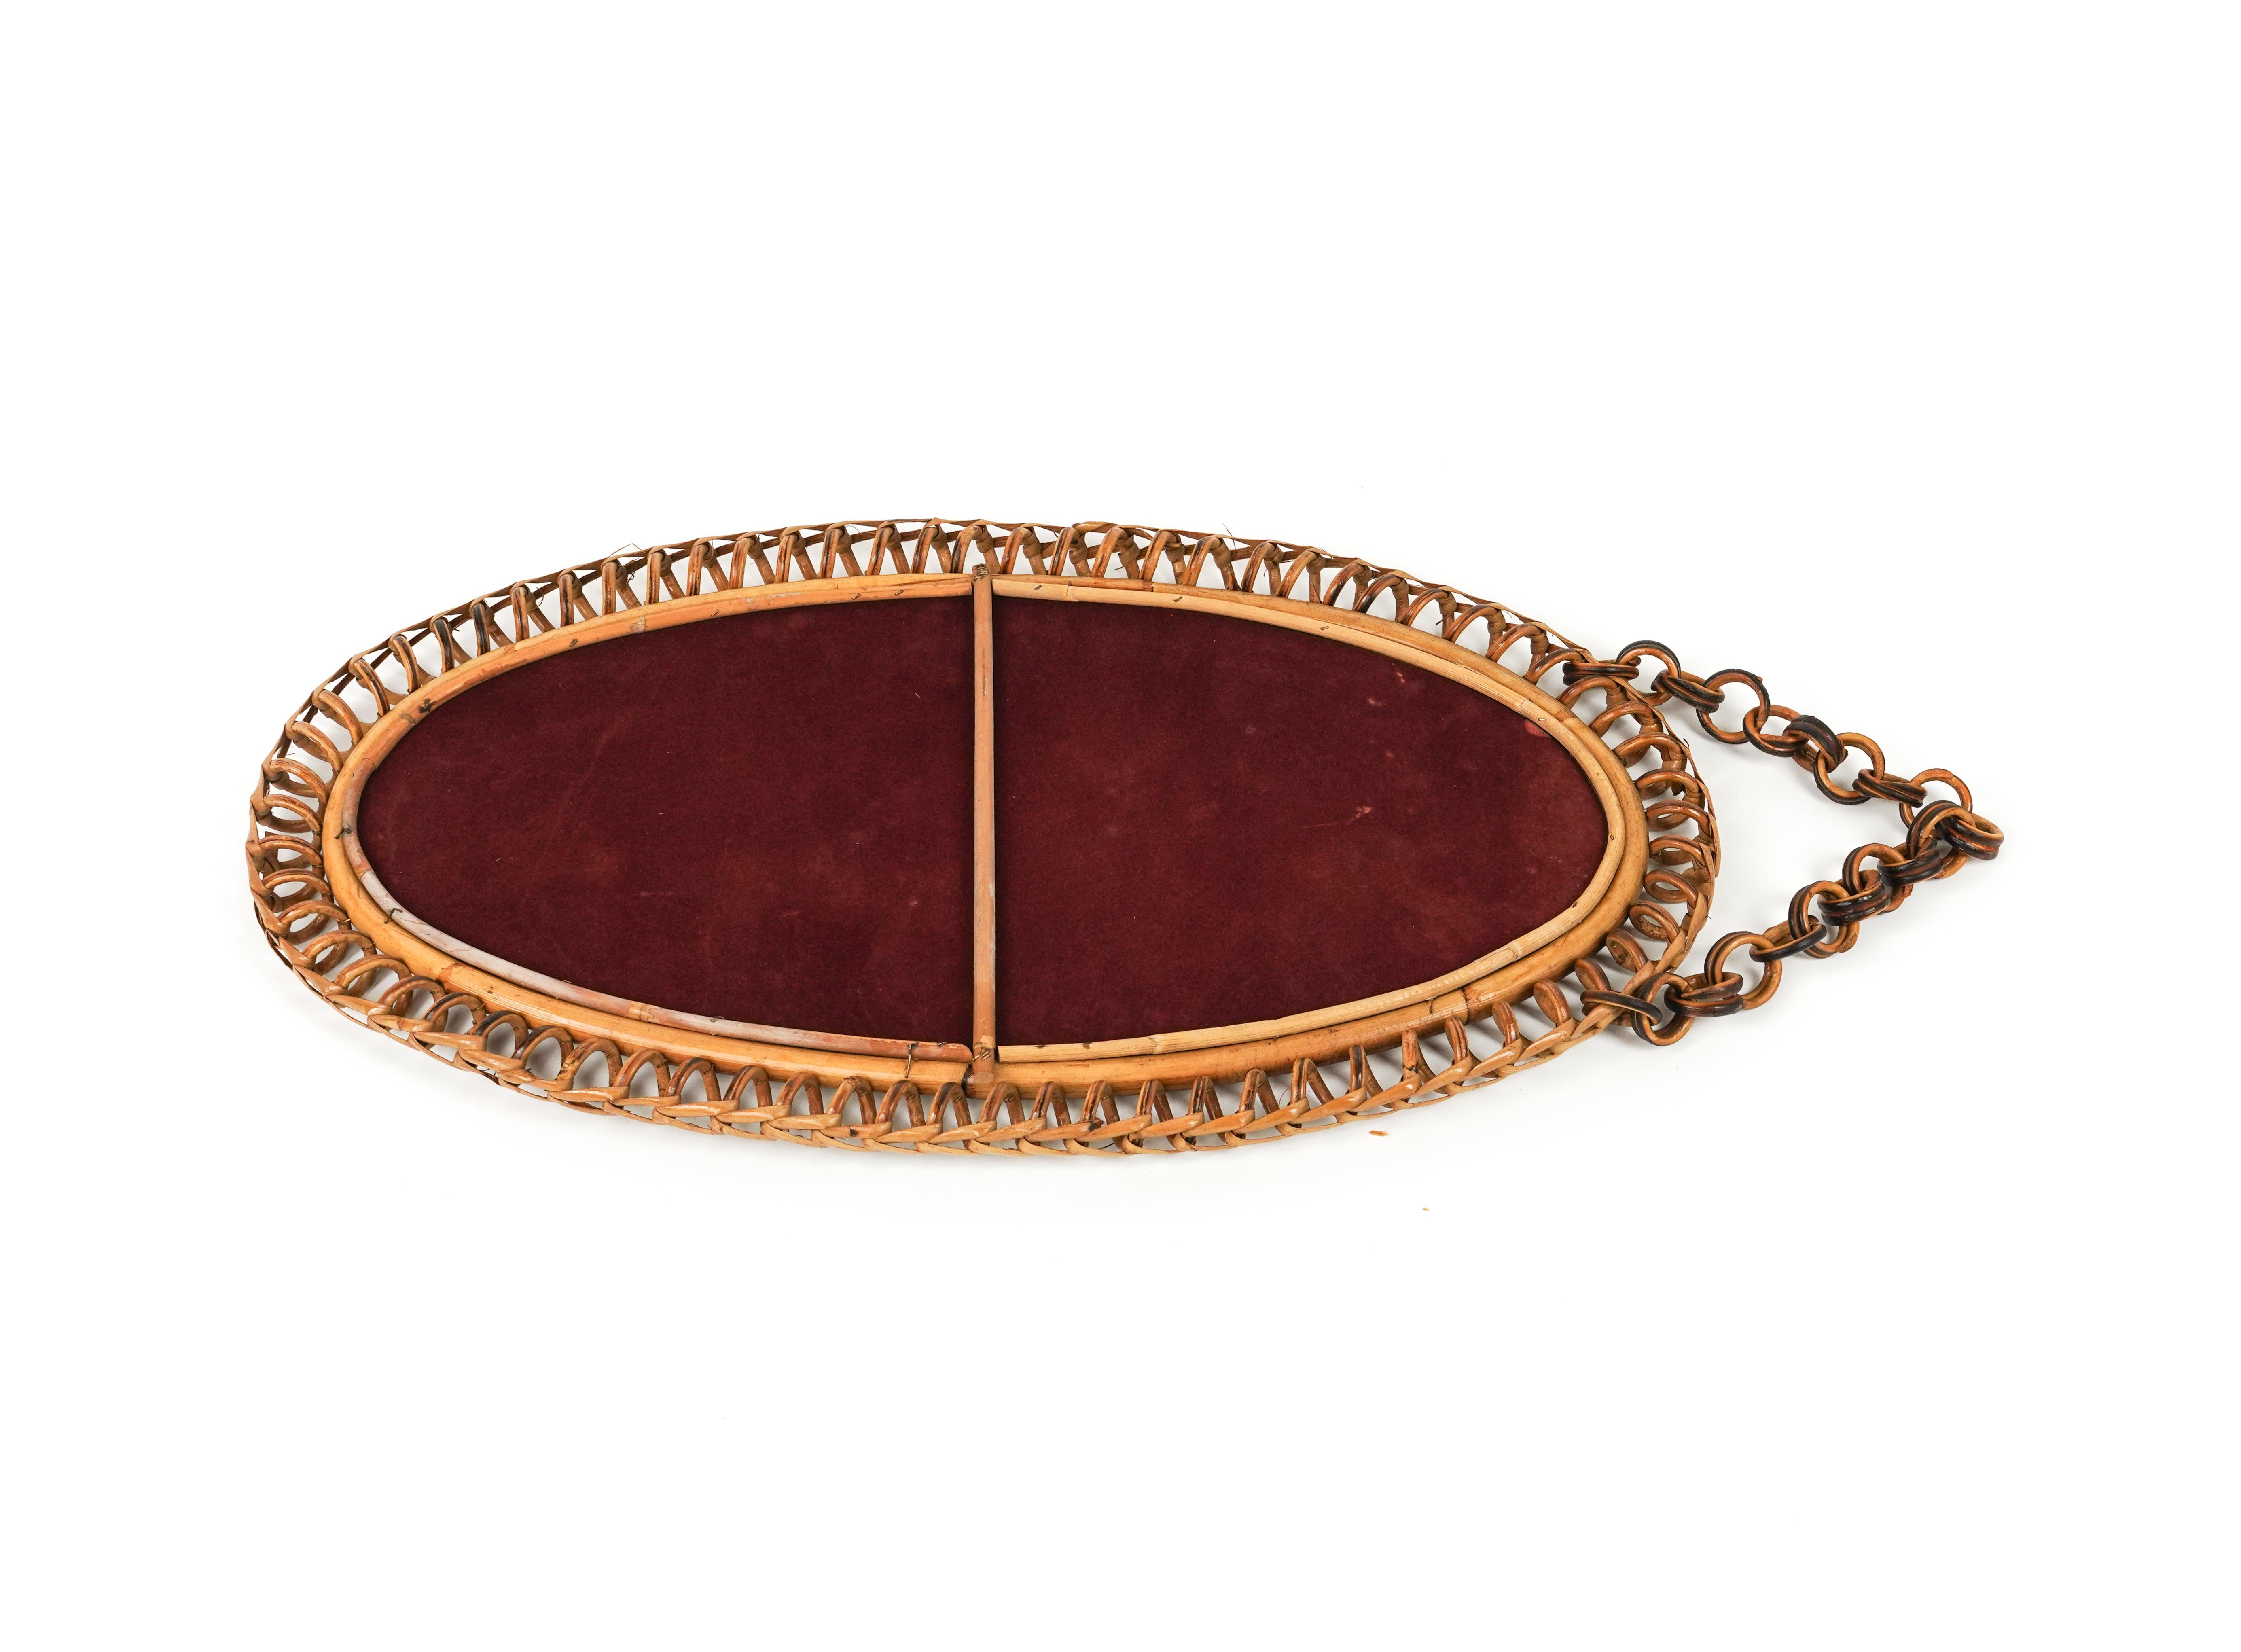 Midcentury Rattan & Bamboo Oval Wall Mirror with Chain, Italy 1960s For Sale 8